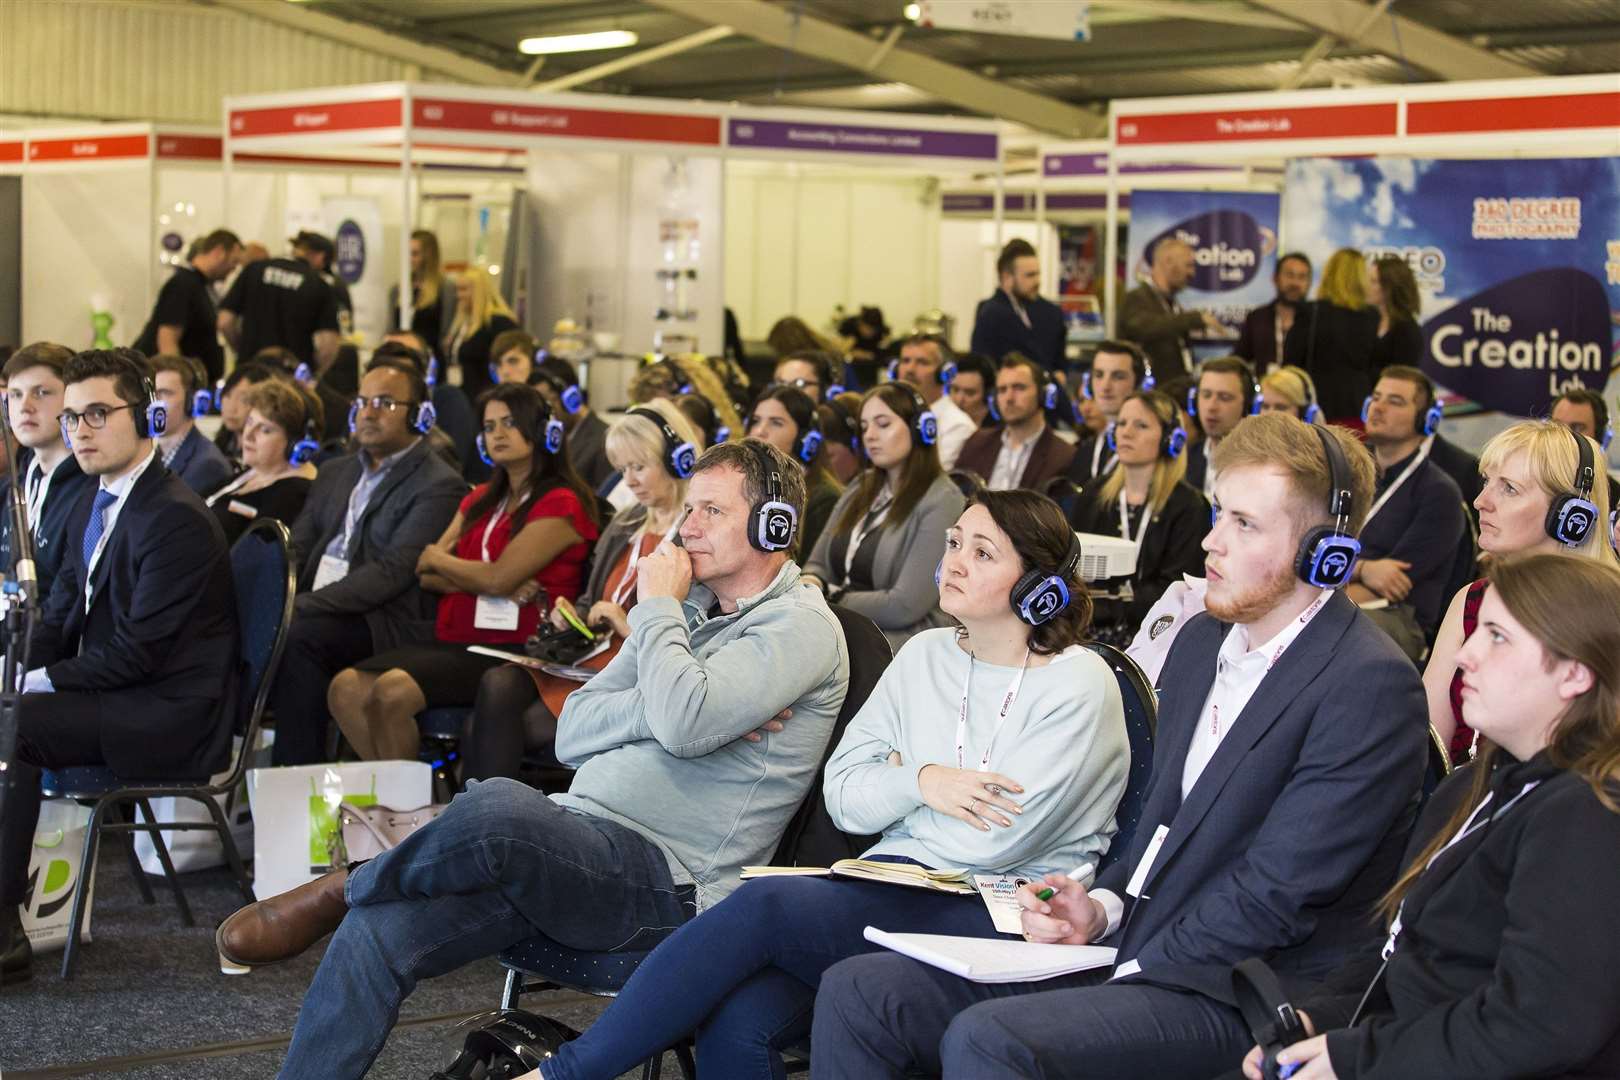 Audience listen keenly to a panel debate at a previous Business Vision event